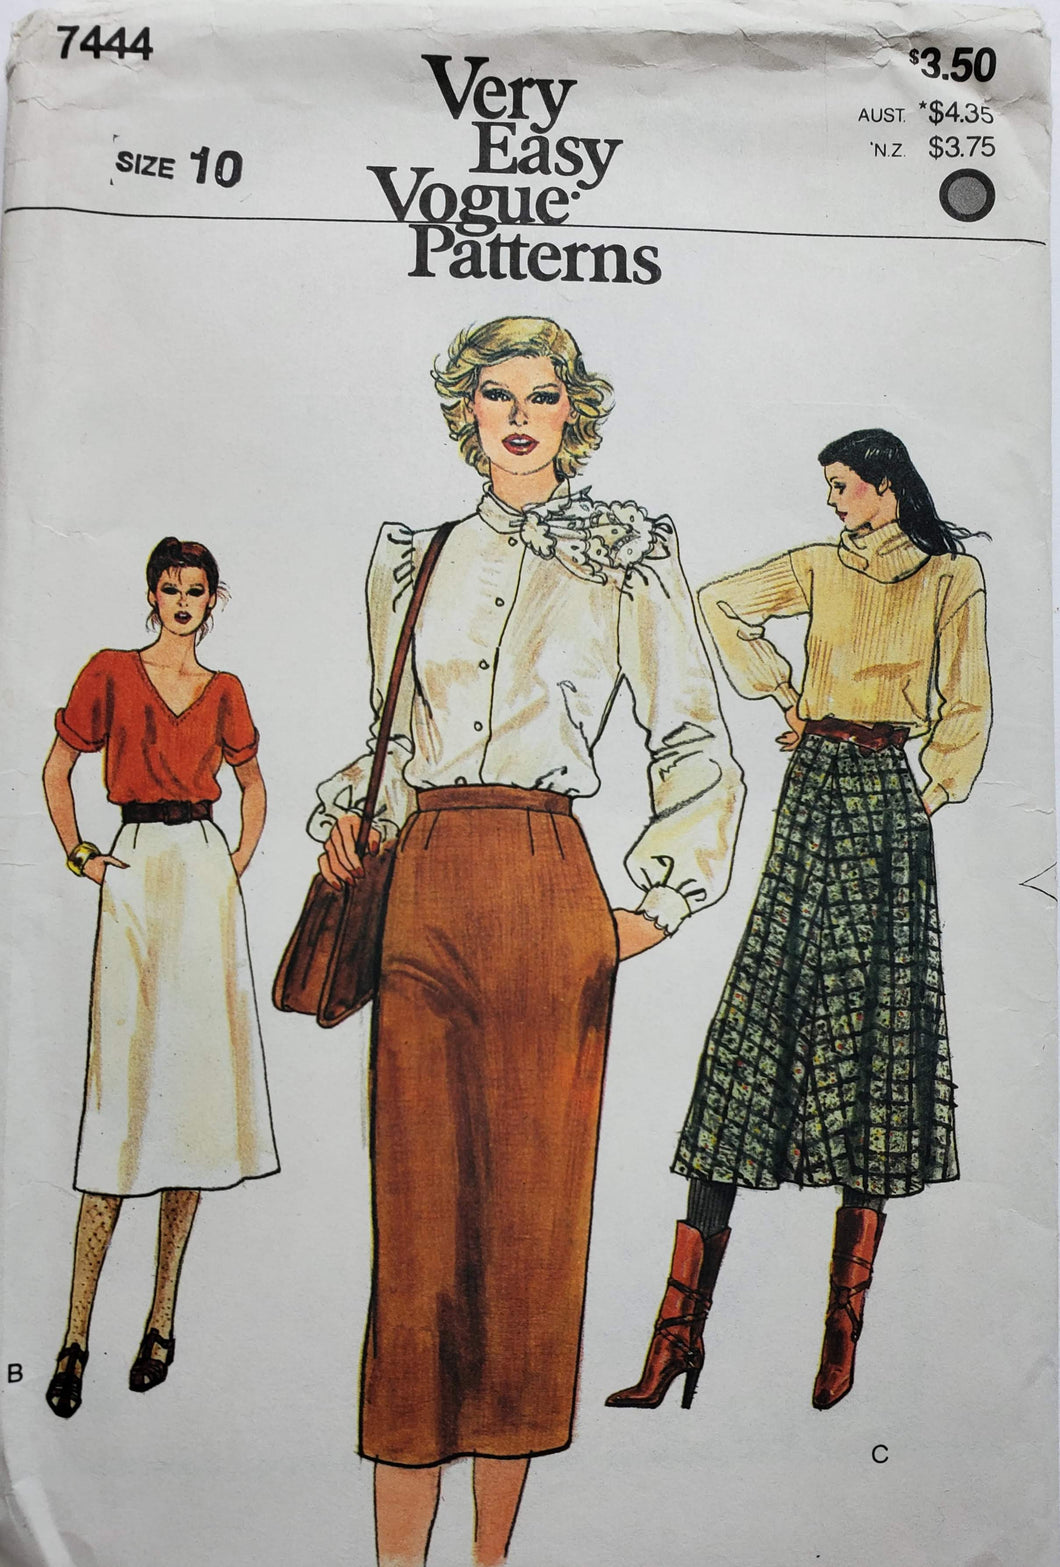 Vogue 7444, UNCUT, Vogue Very Easy Pattern, Skirts, Size 10